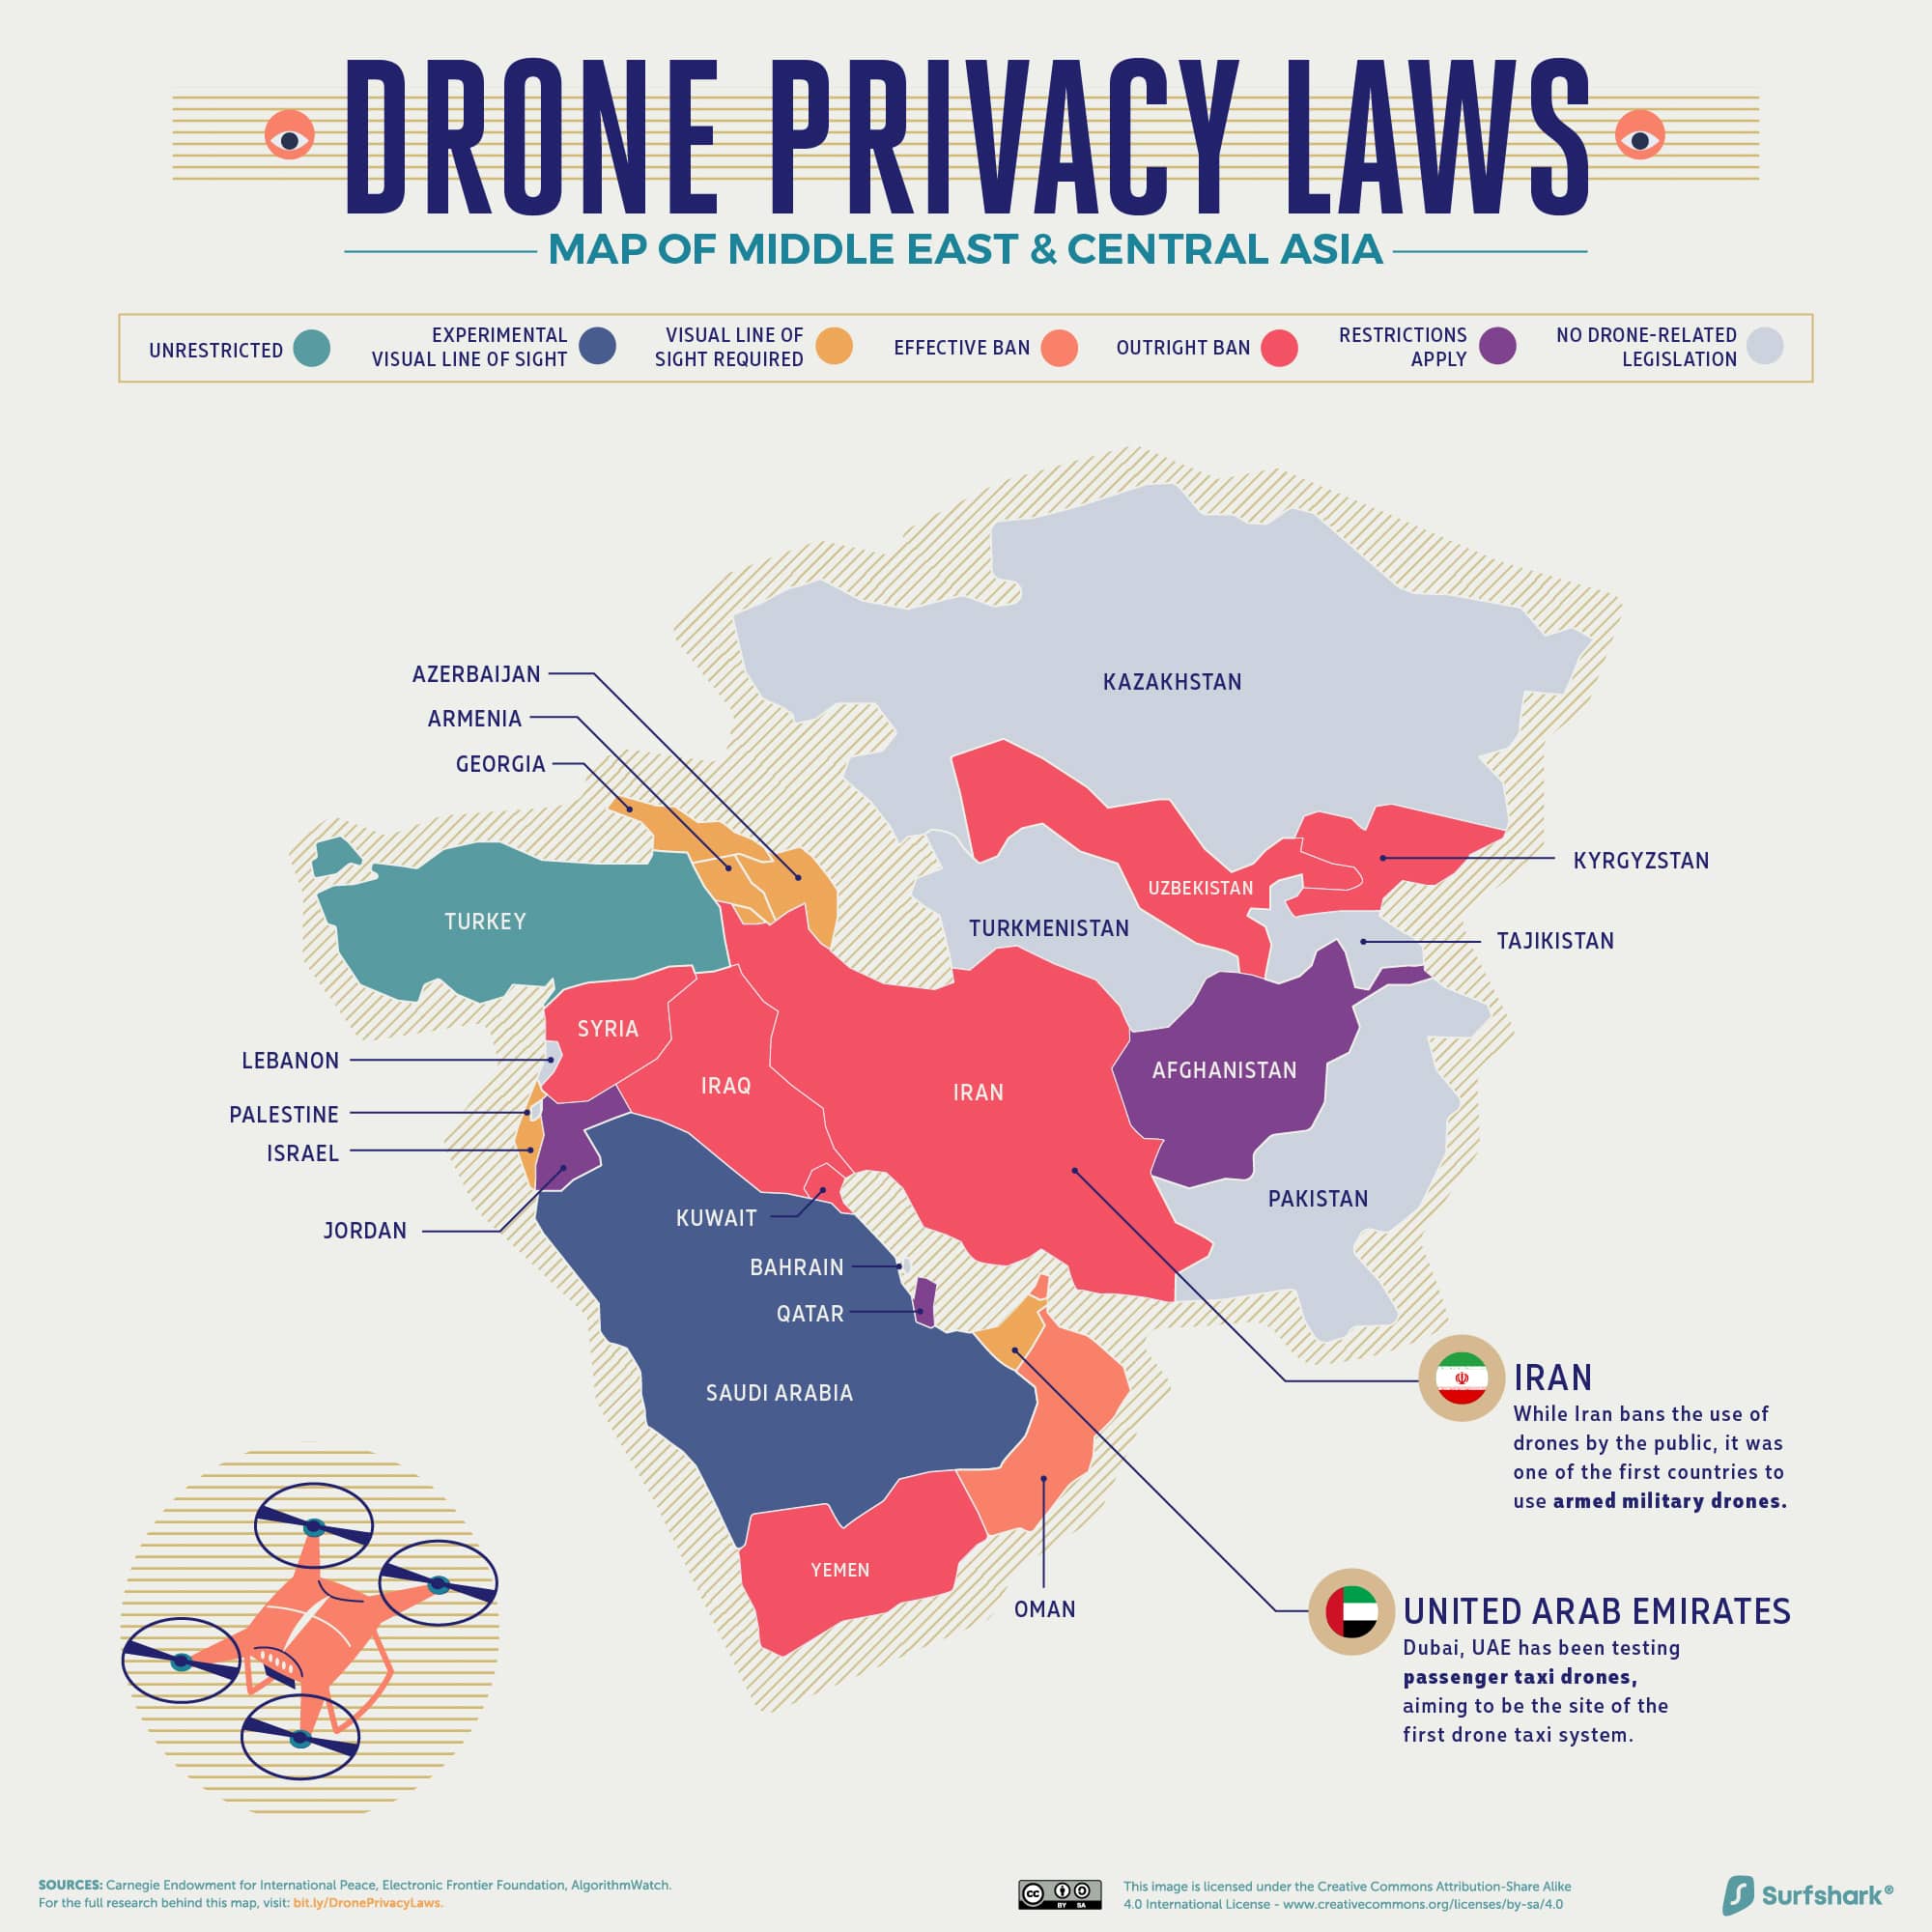 a map of Middle East and Central Asia with drone privacy laws for each country coded in color